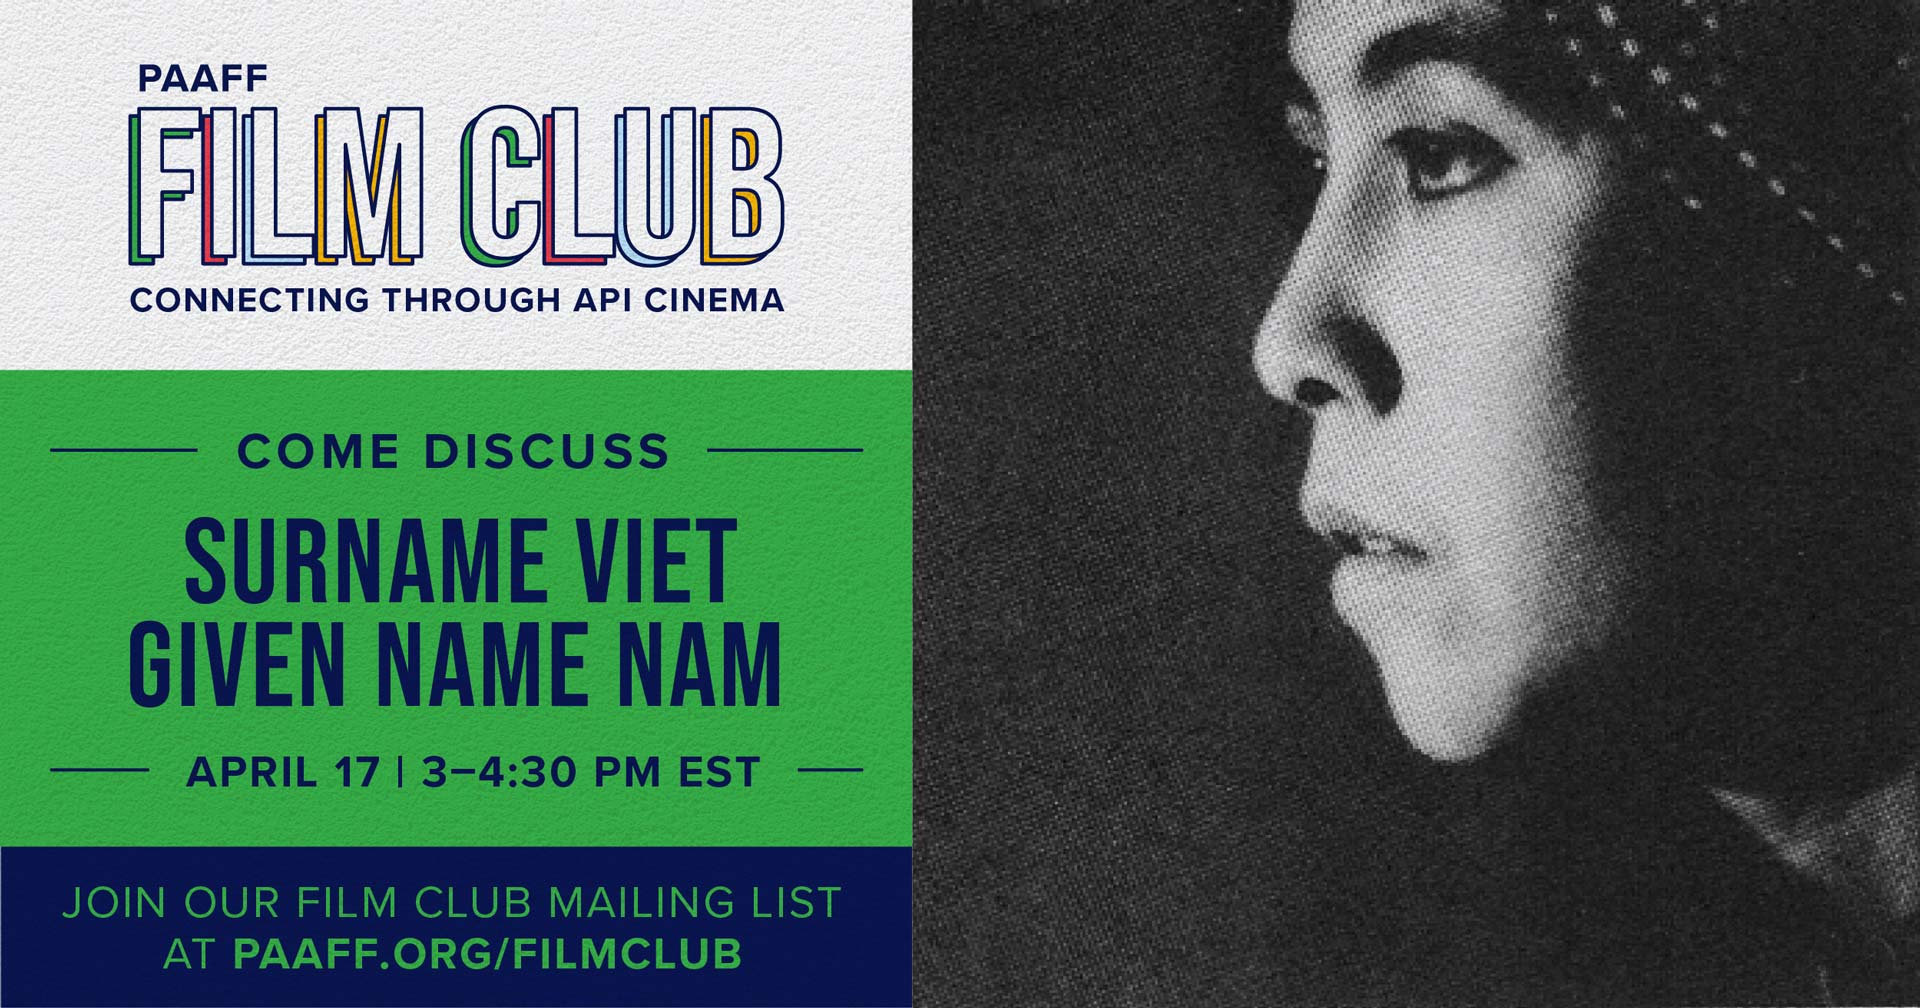 PAAFF April 2021 Film Club Graphic - Reads "Come discus Surname Viet Given Name Nam - April 17 | 3–4:30 PM EST. Join our Film Club Mailing List at paaff.org/filmclub" Woman's face looking to the left left in black and white.